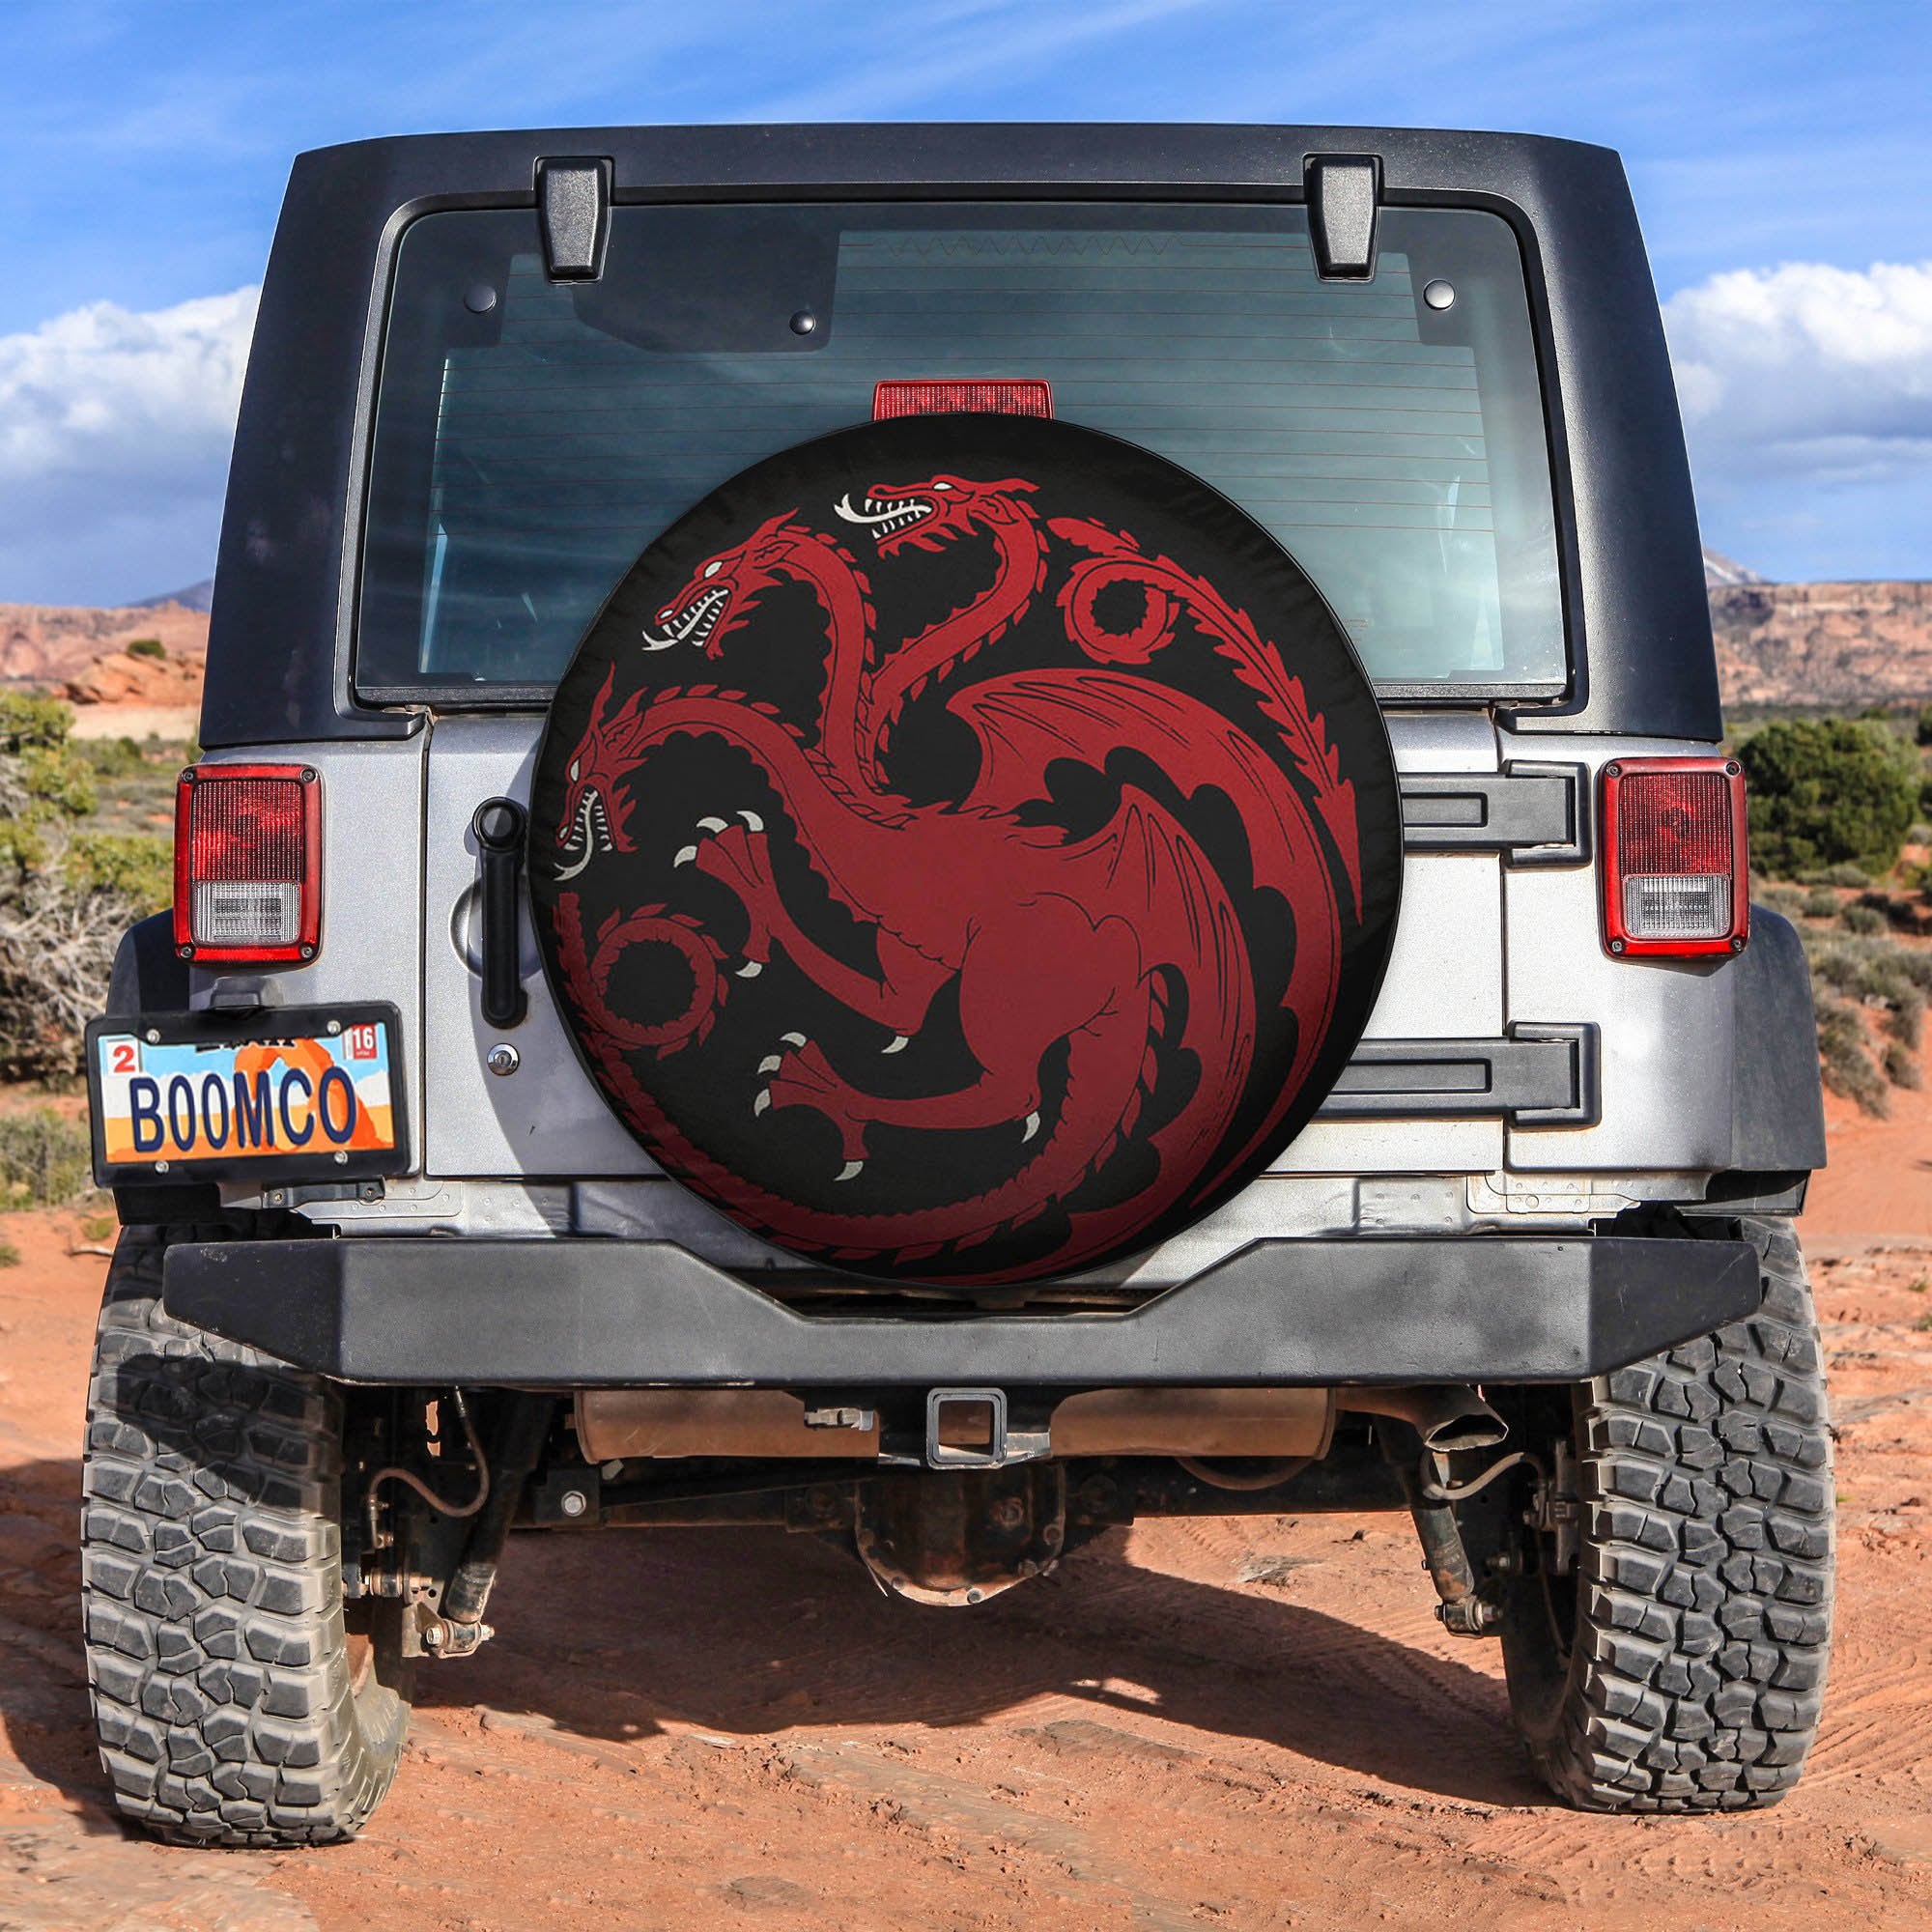 Tageryen Dragon Spare Tire Covers Gift For Campers